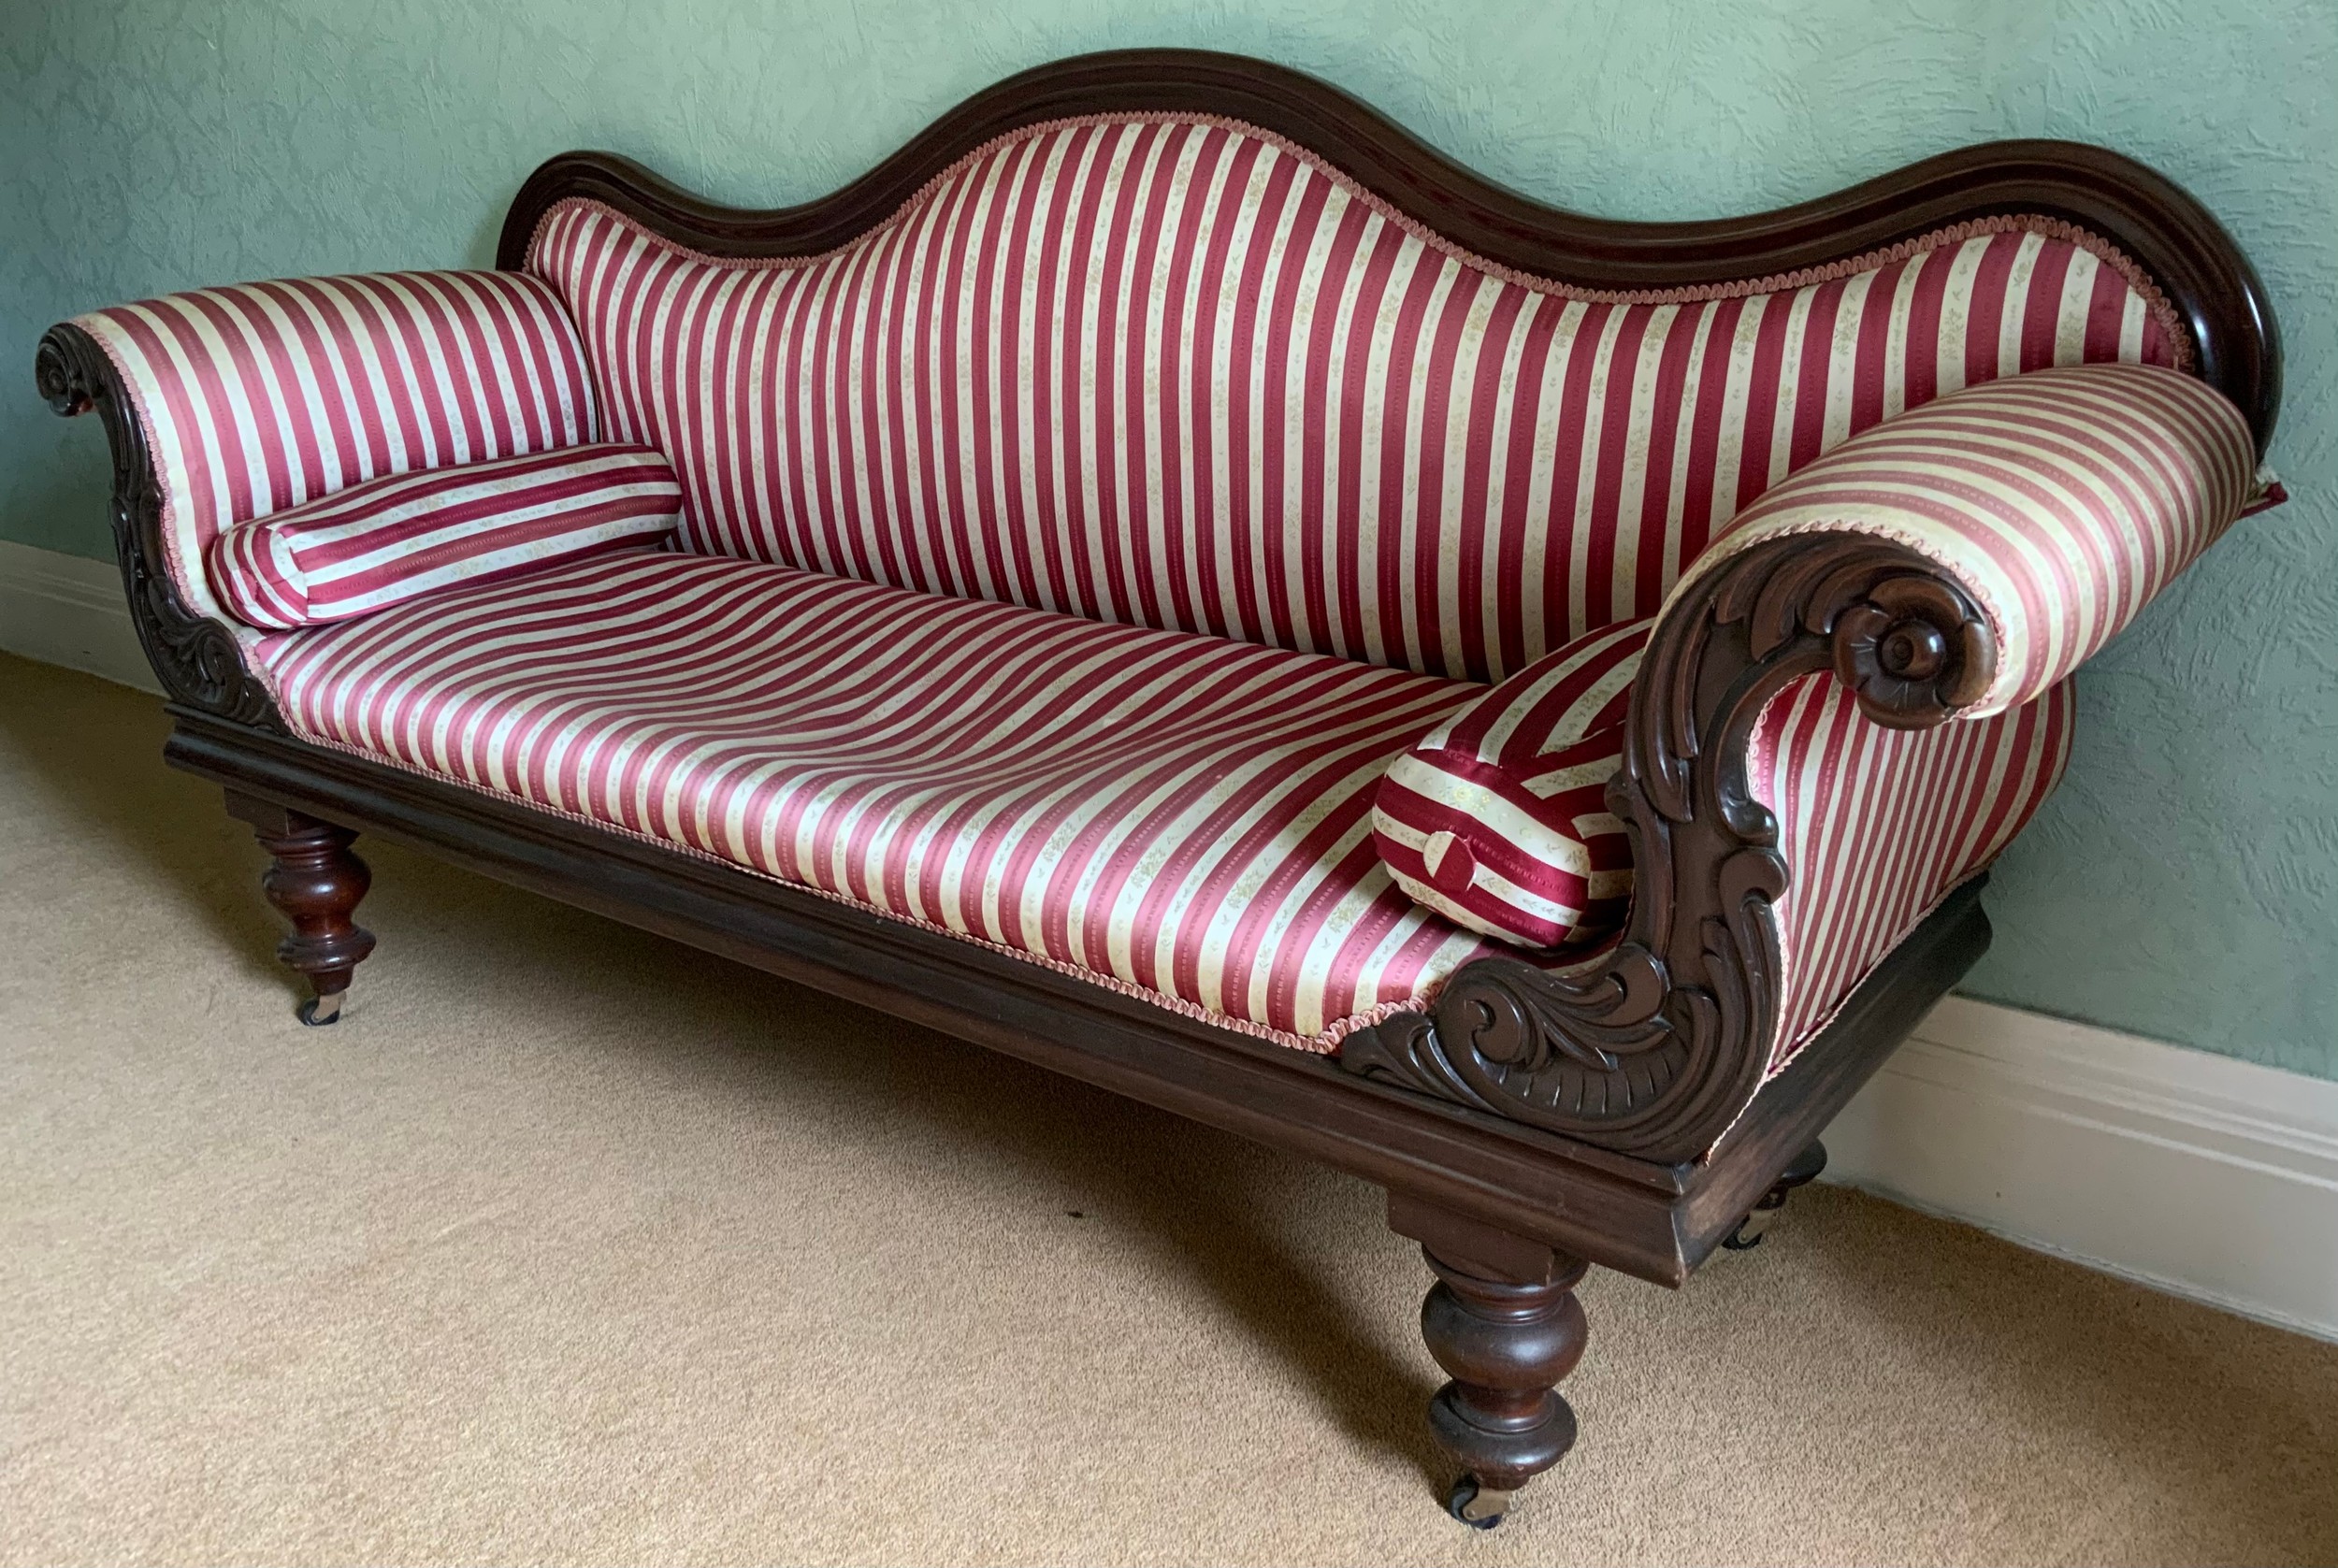 A Victorian mahogany sofa, leafy scroll arms, turned legs, red adn white striped upholstery, 208cm - Image 2 of 3